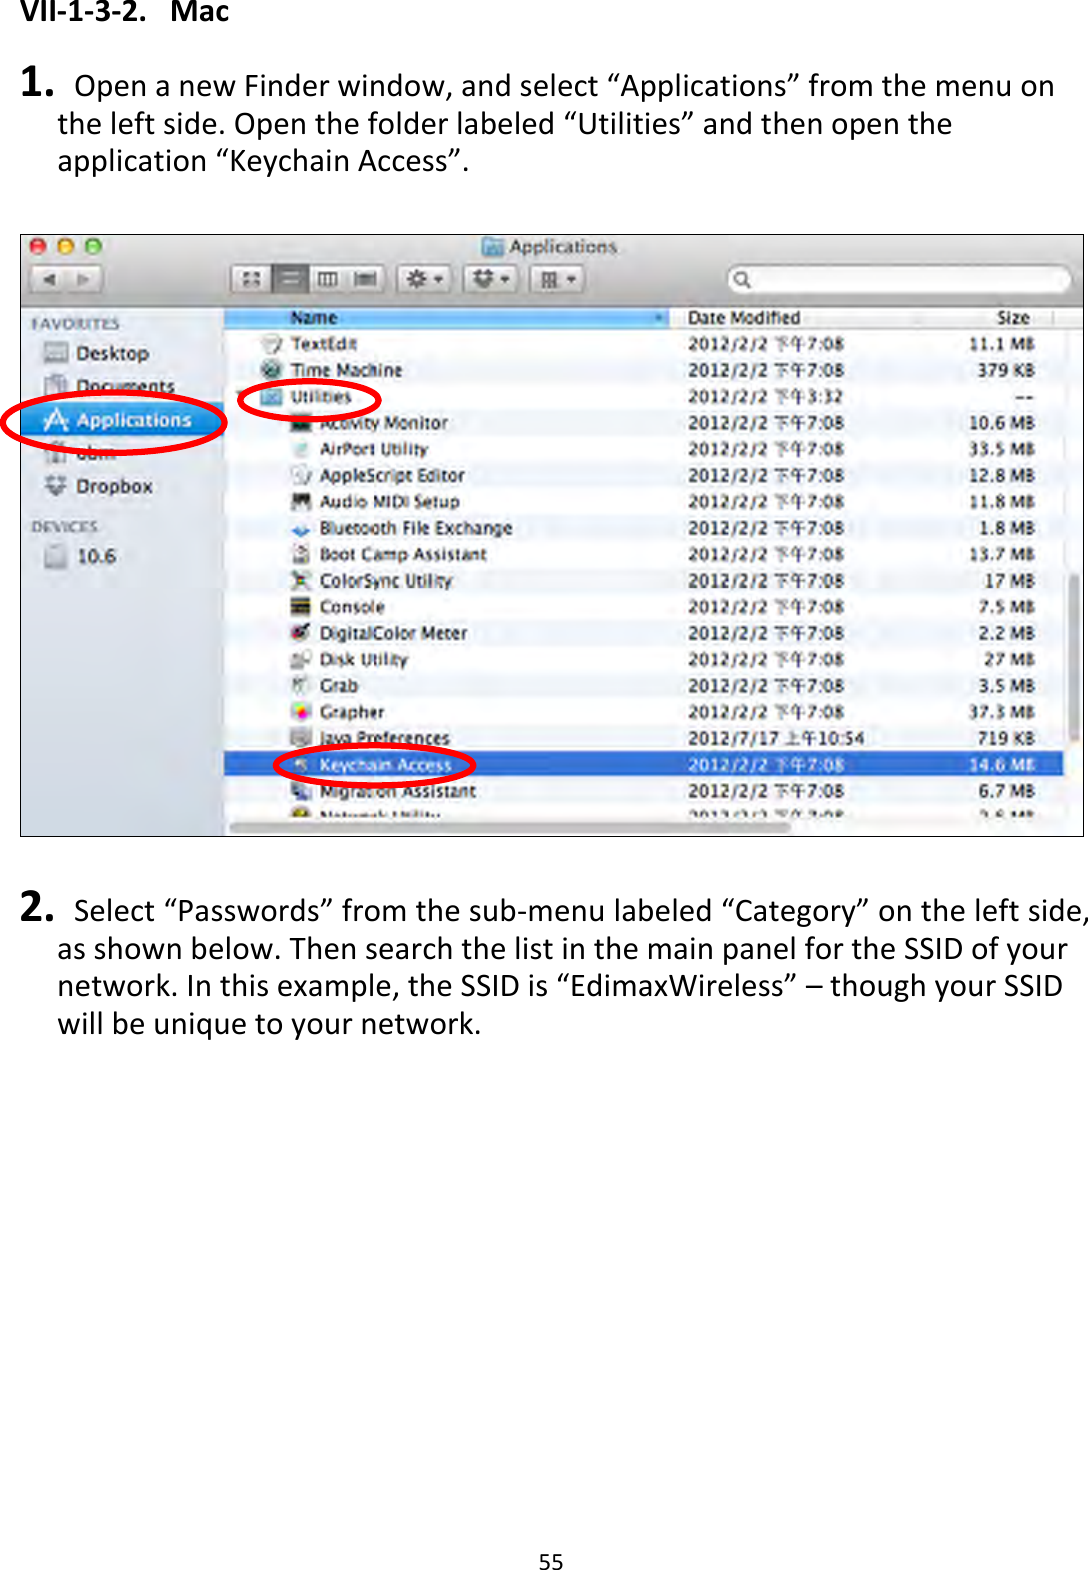 55 VII-1-3-2.  Mac  1.  Open a new Finder window, and select “Applications” from the menu on the left side. Open the folder labeled “Utilities” and then open the application “Keychain Access”.    2.  Select “Passwords” from the sub-menu labeled “Category” on the left side, as shown below. Then search the list in the main panel for the SSID of your network. In this example, the SSID is “EdimaxWireless” – though your SSID will be unique to your network.  